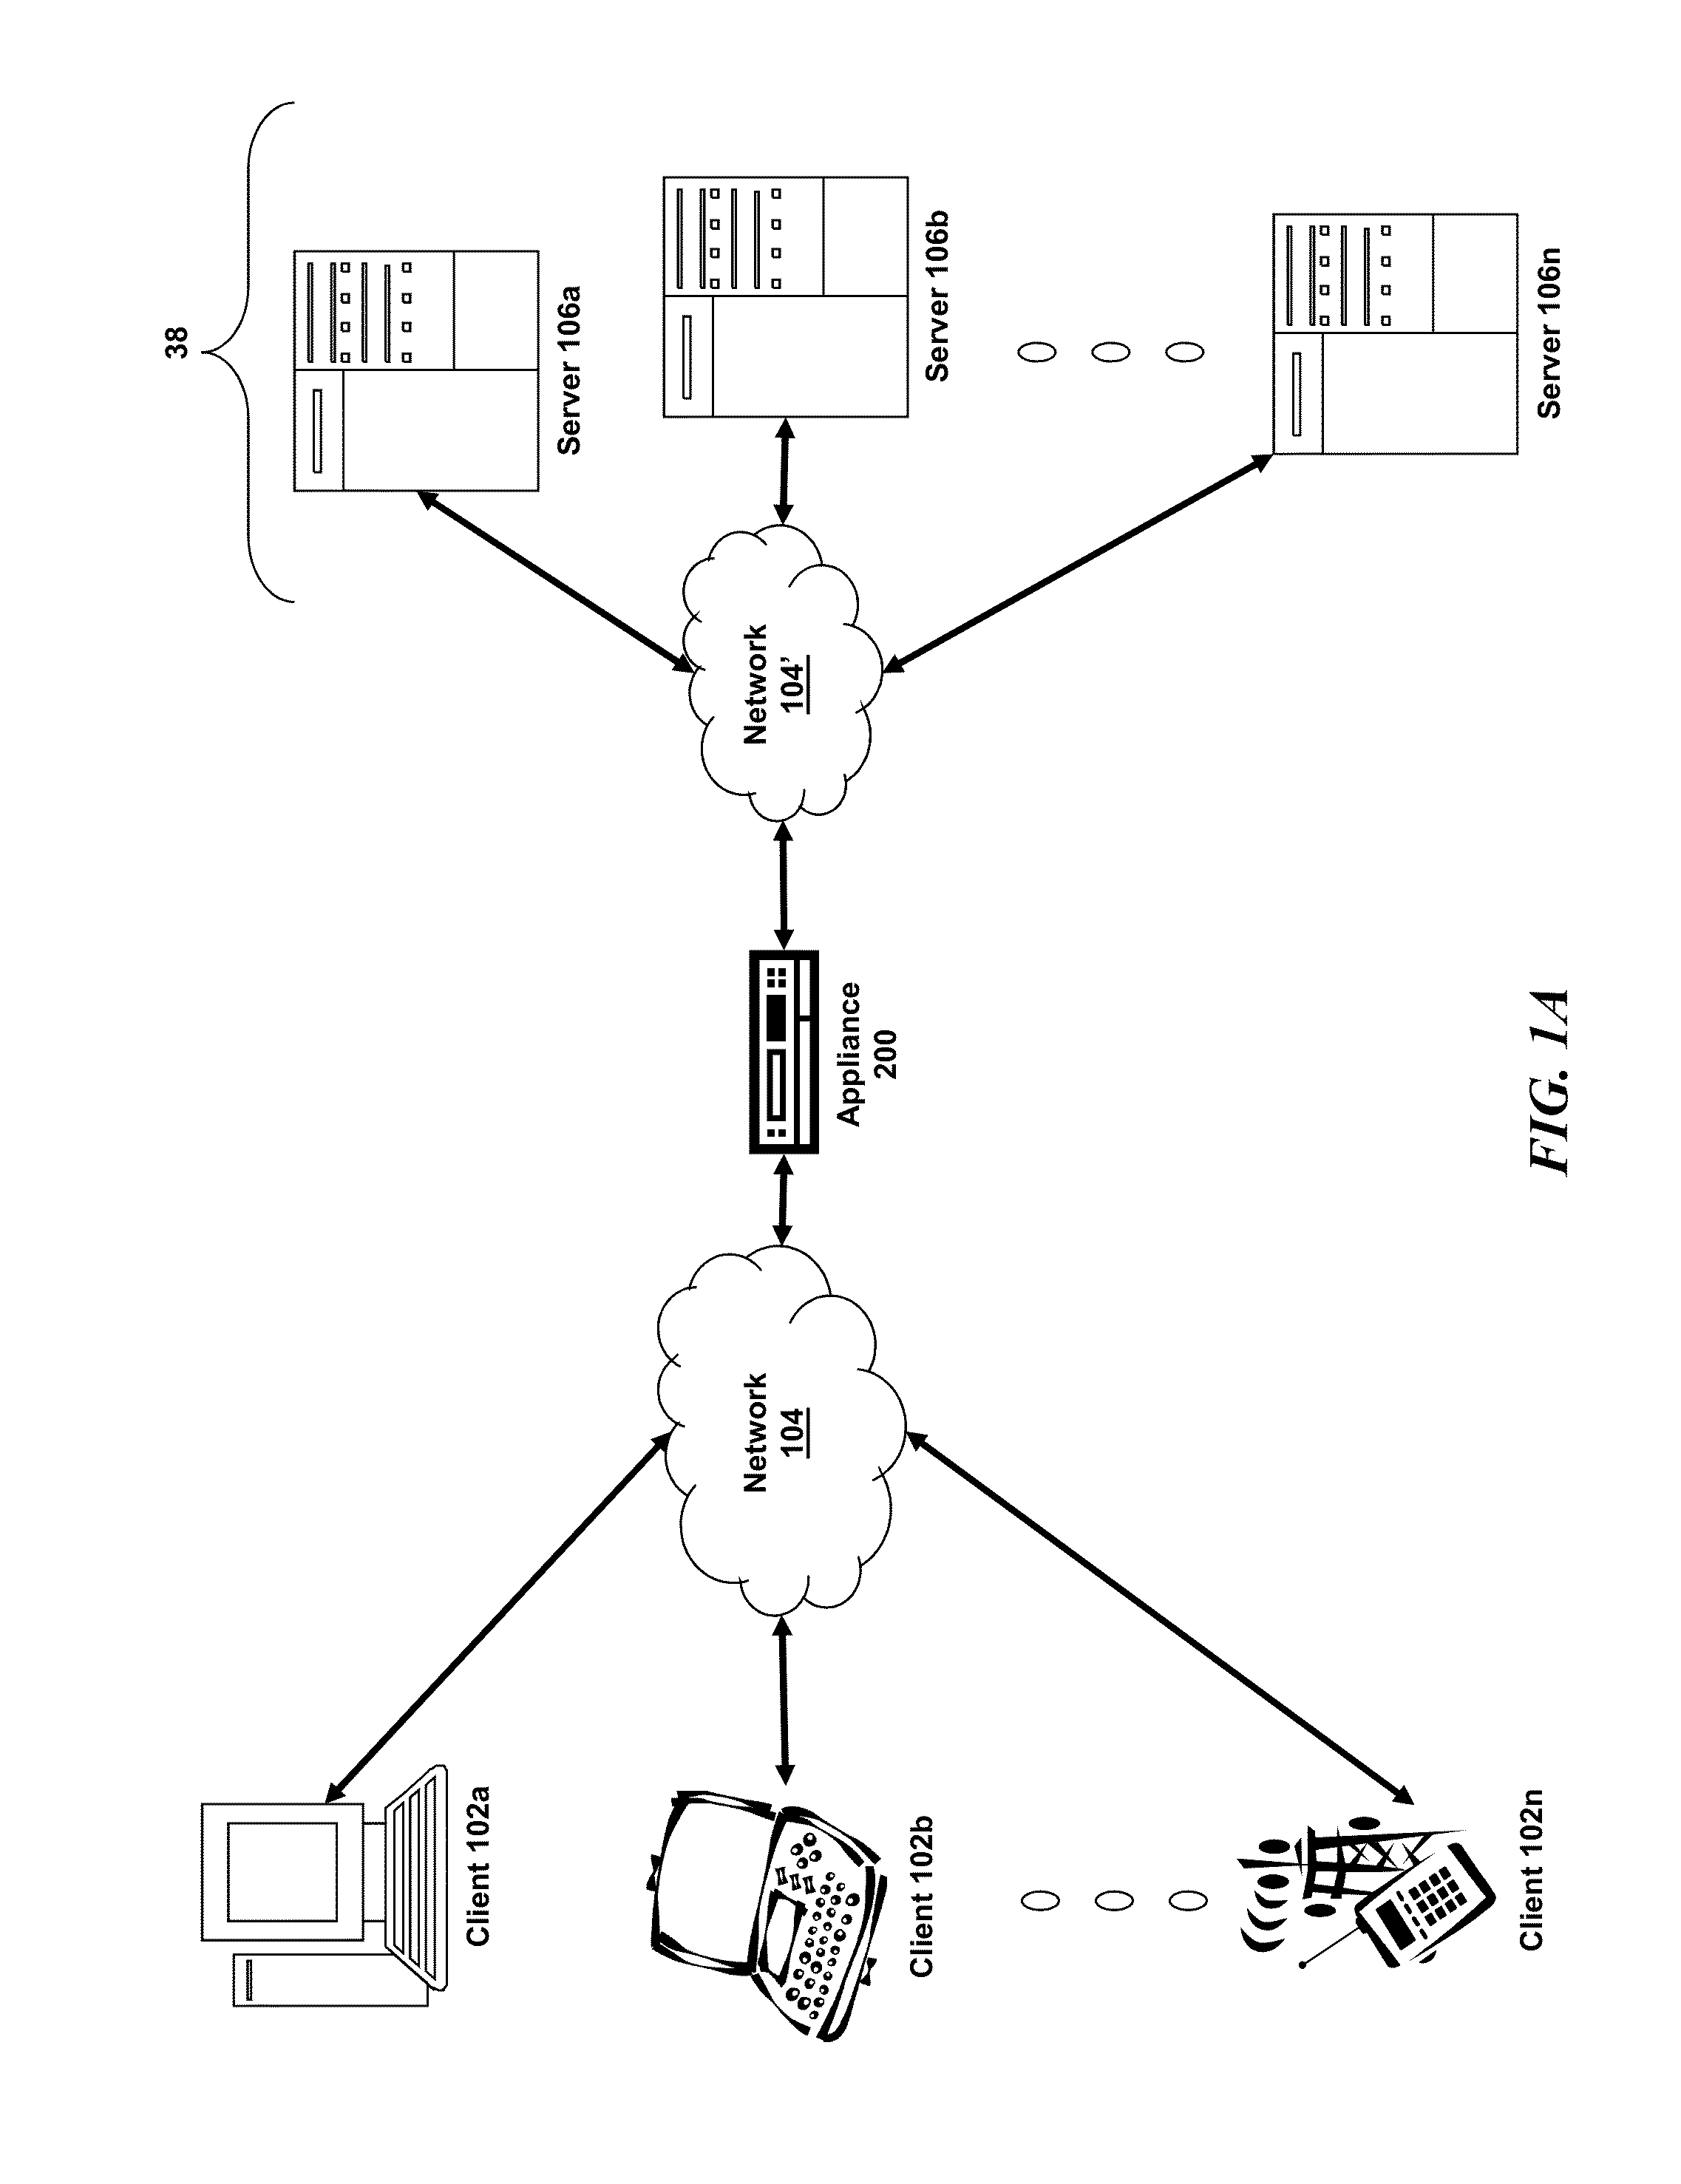 Systems and methods for least connection load balancing by multi-core device